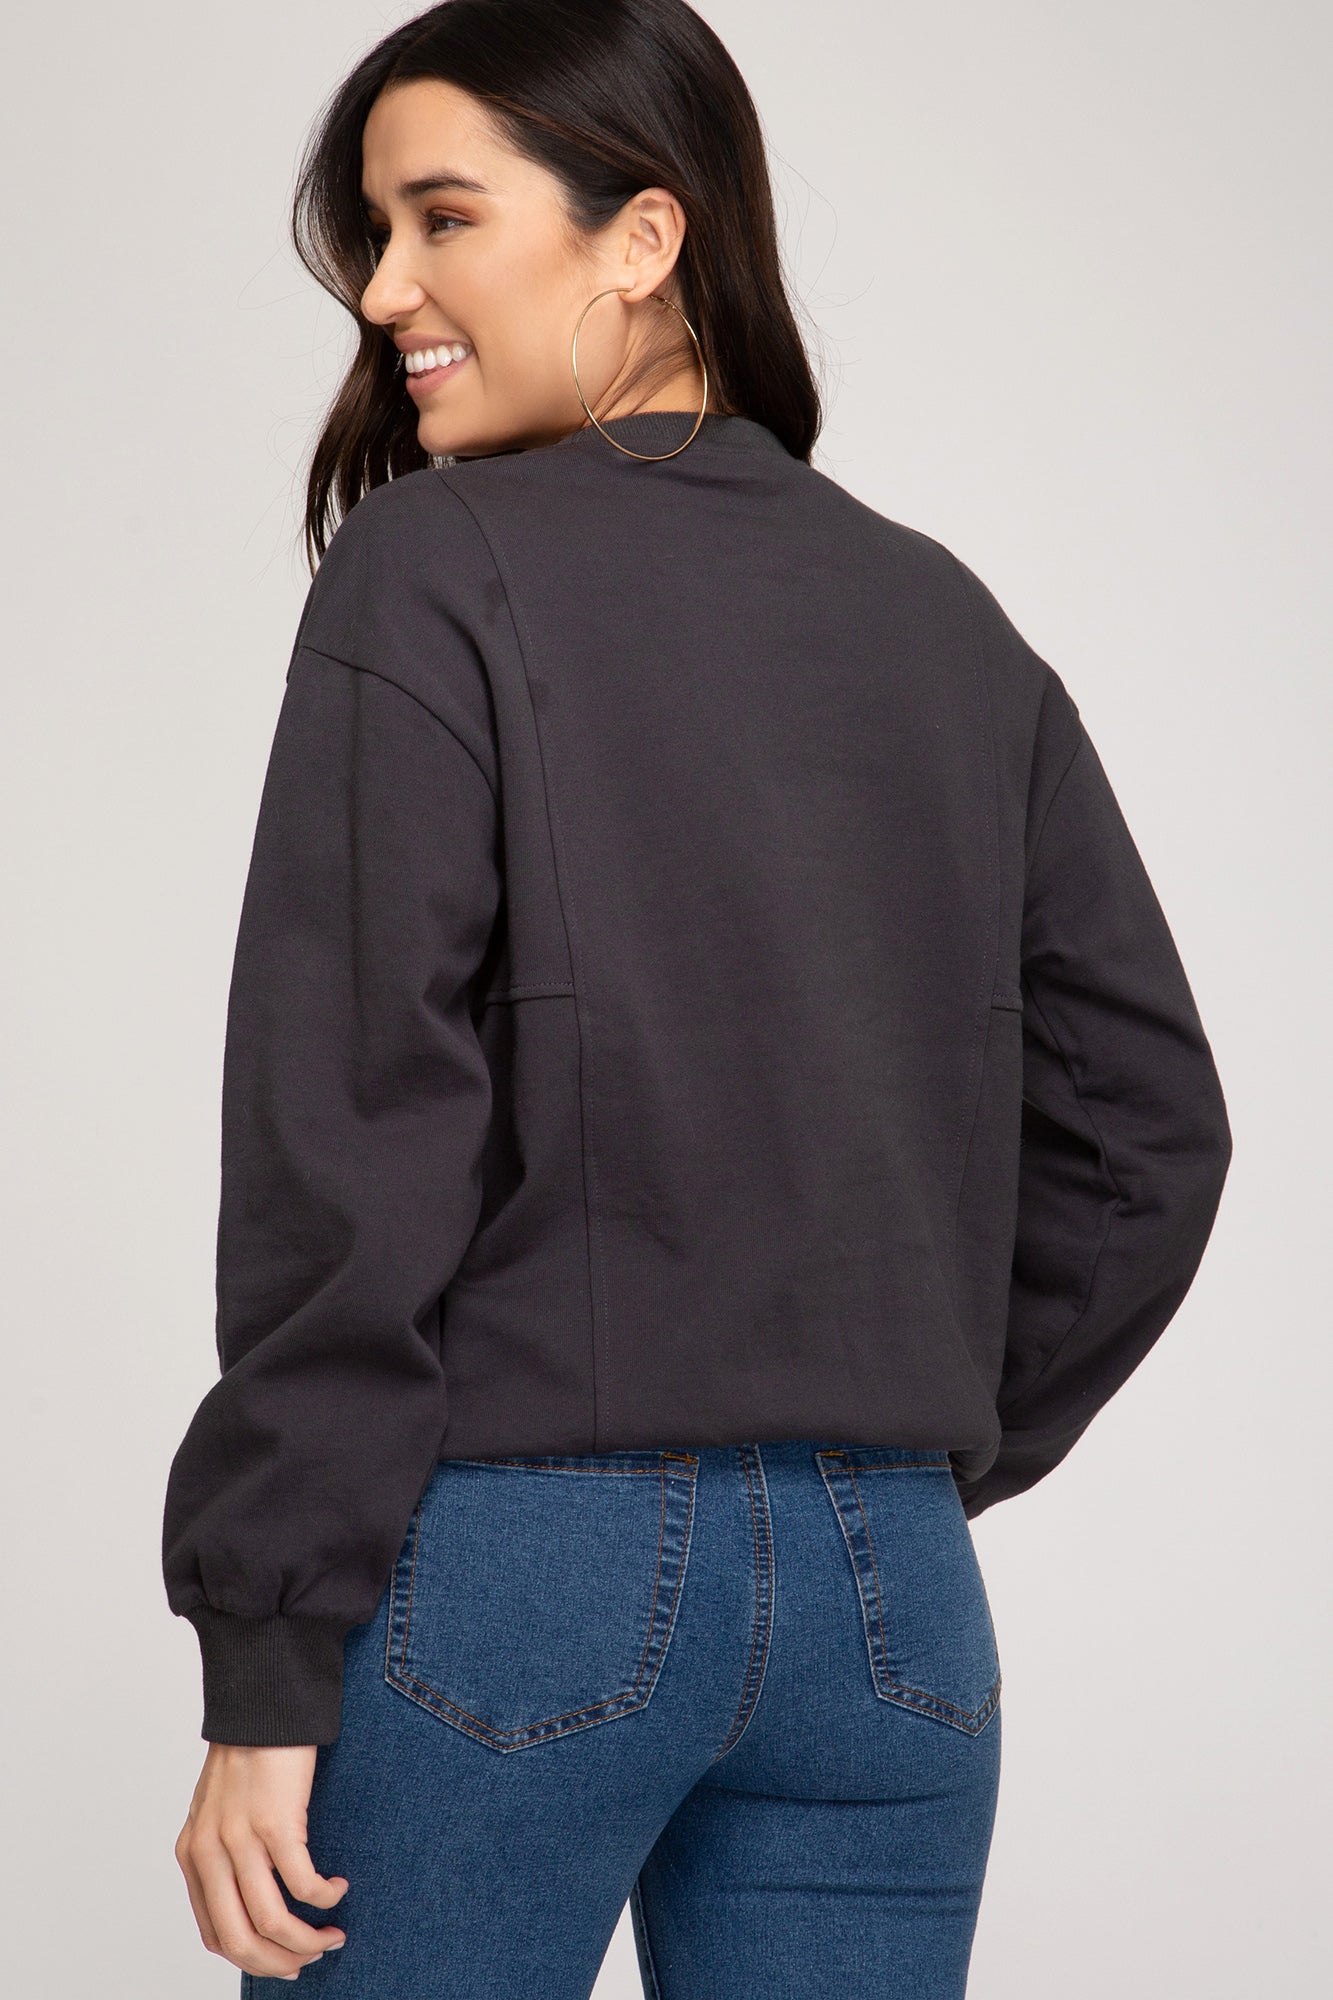 Long Sleeve Pullover In Charcoal